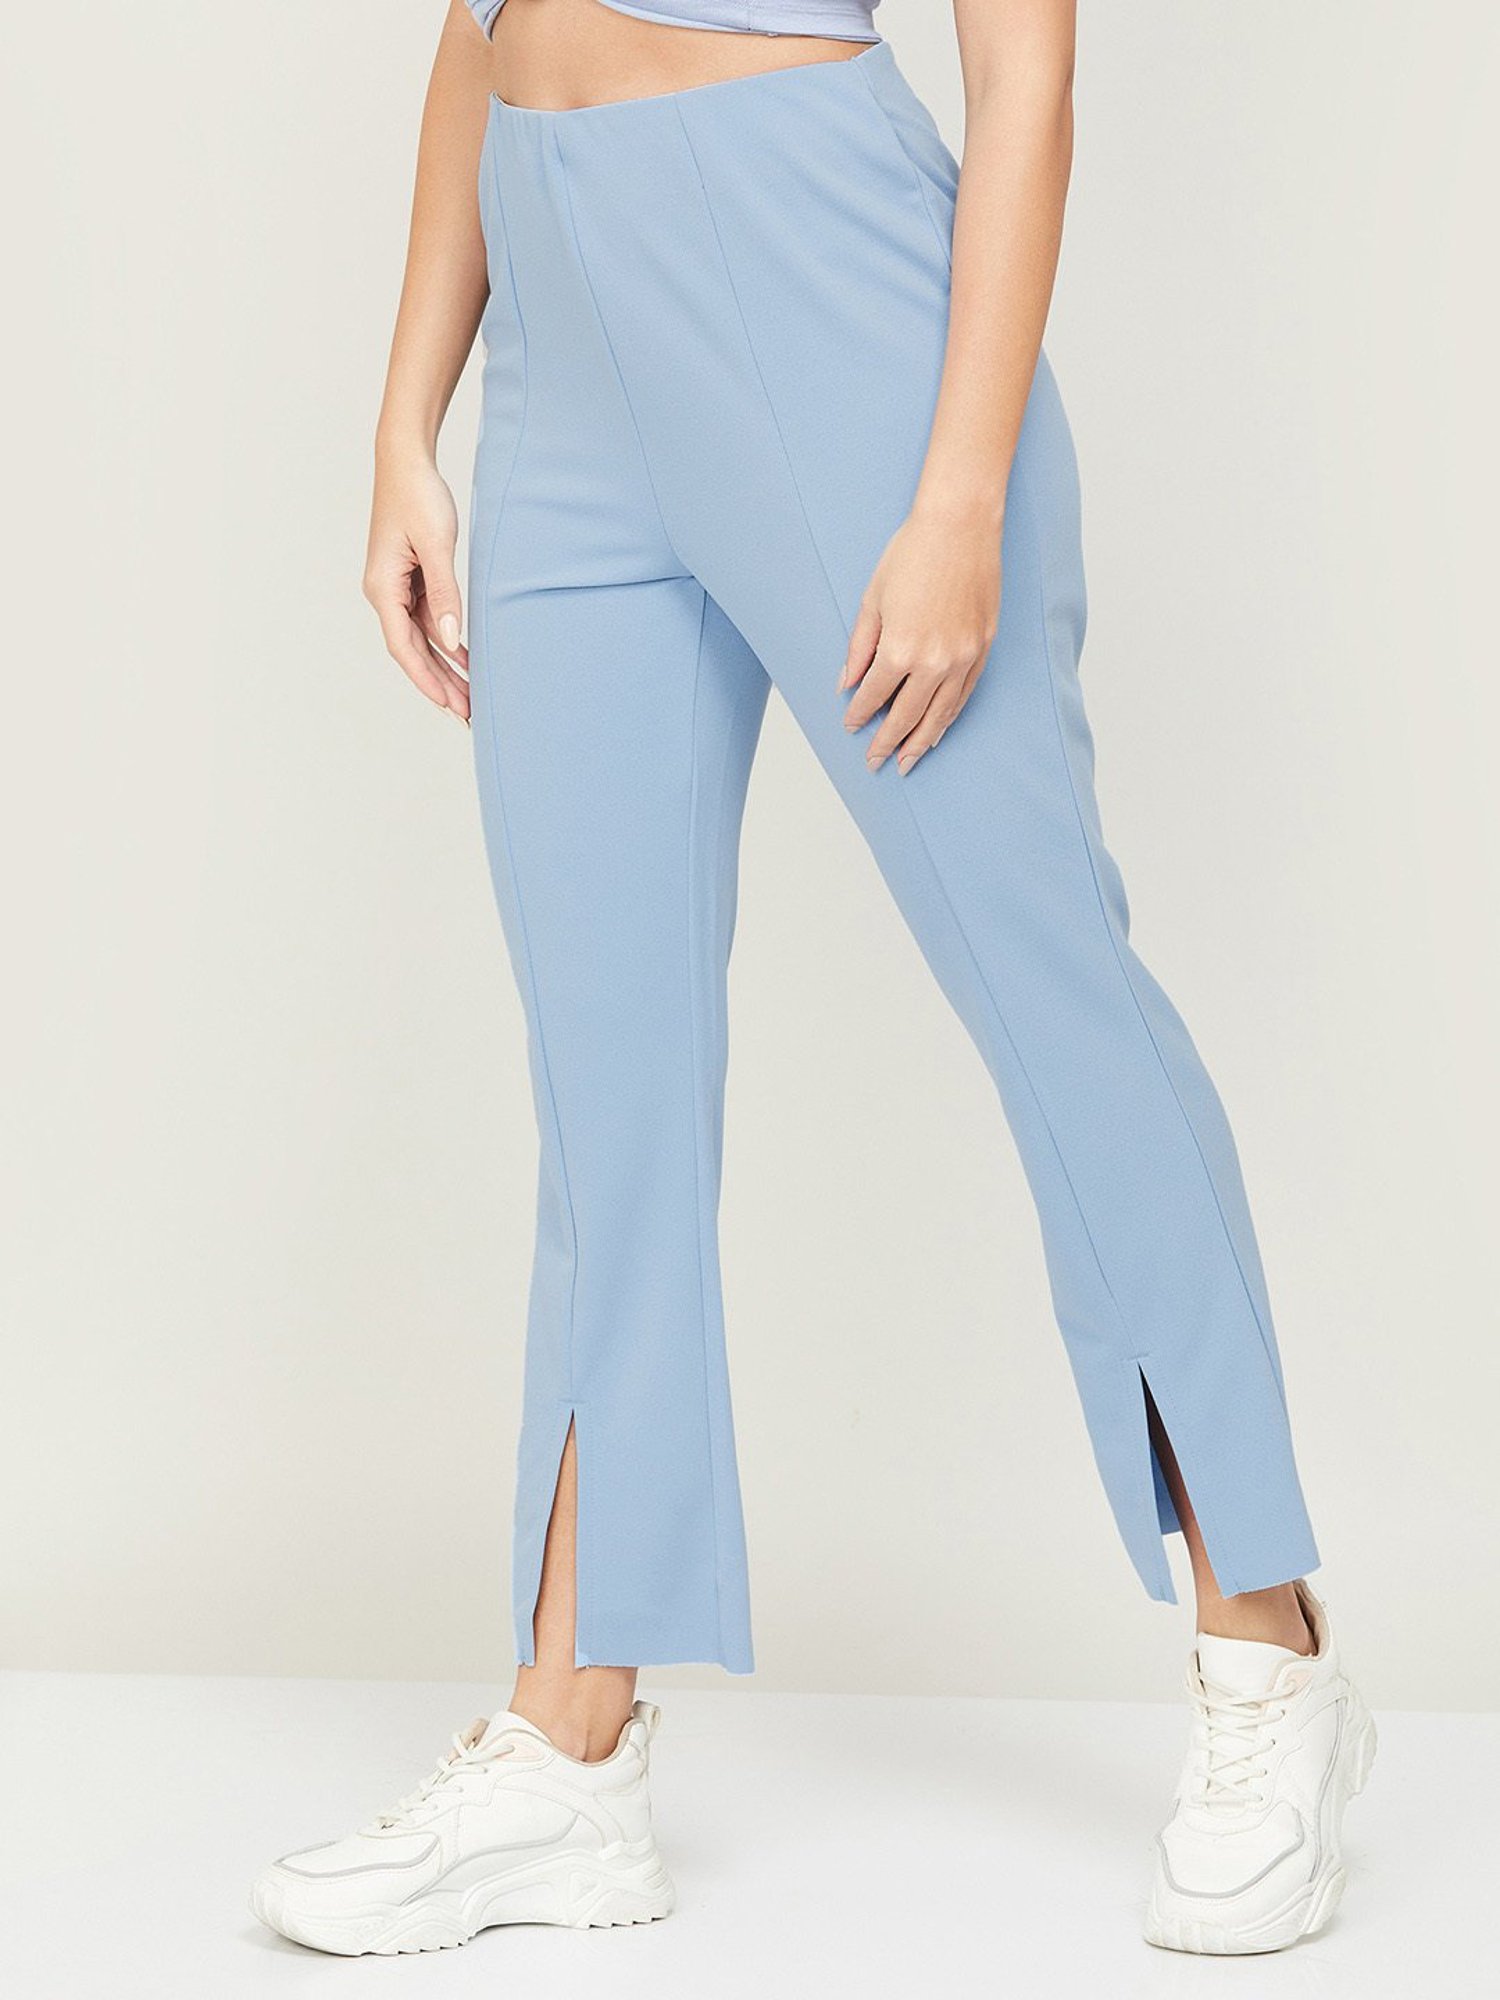 Trouser in Sky Blue – BOTTOMS UP